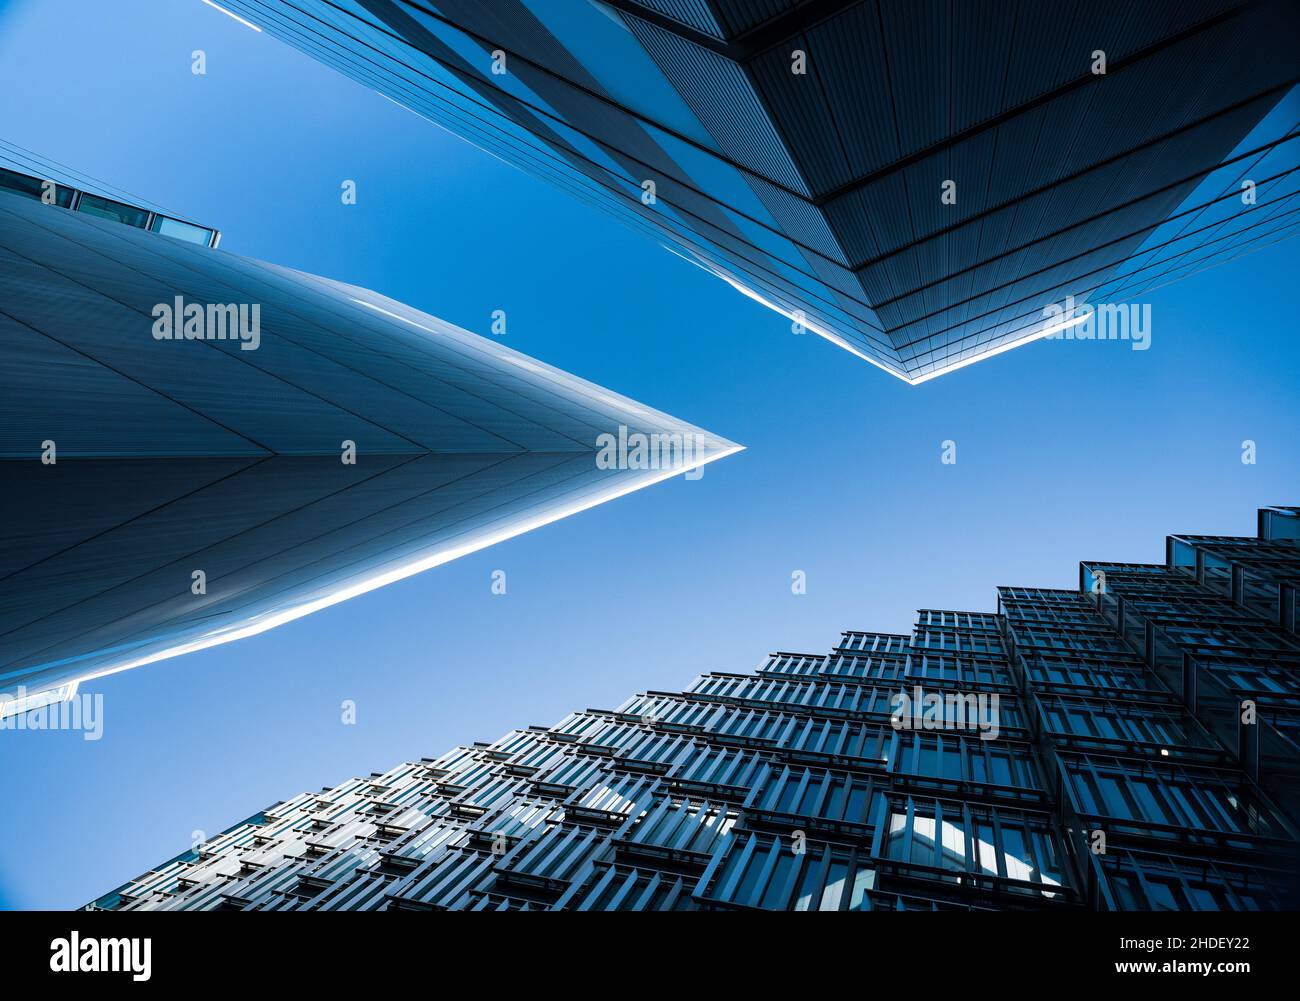 Abstract architectural images looking up at commercial buildingsmafe of glass and steel in London, UK Stock Photo